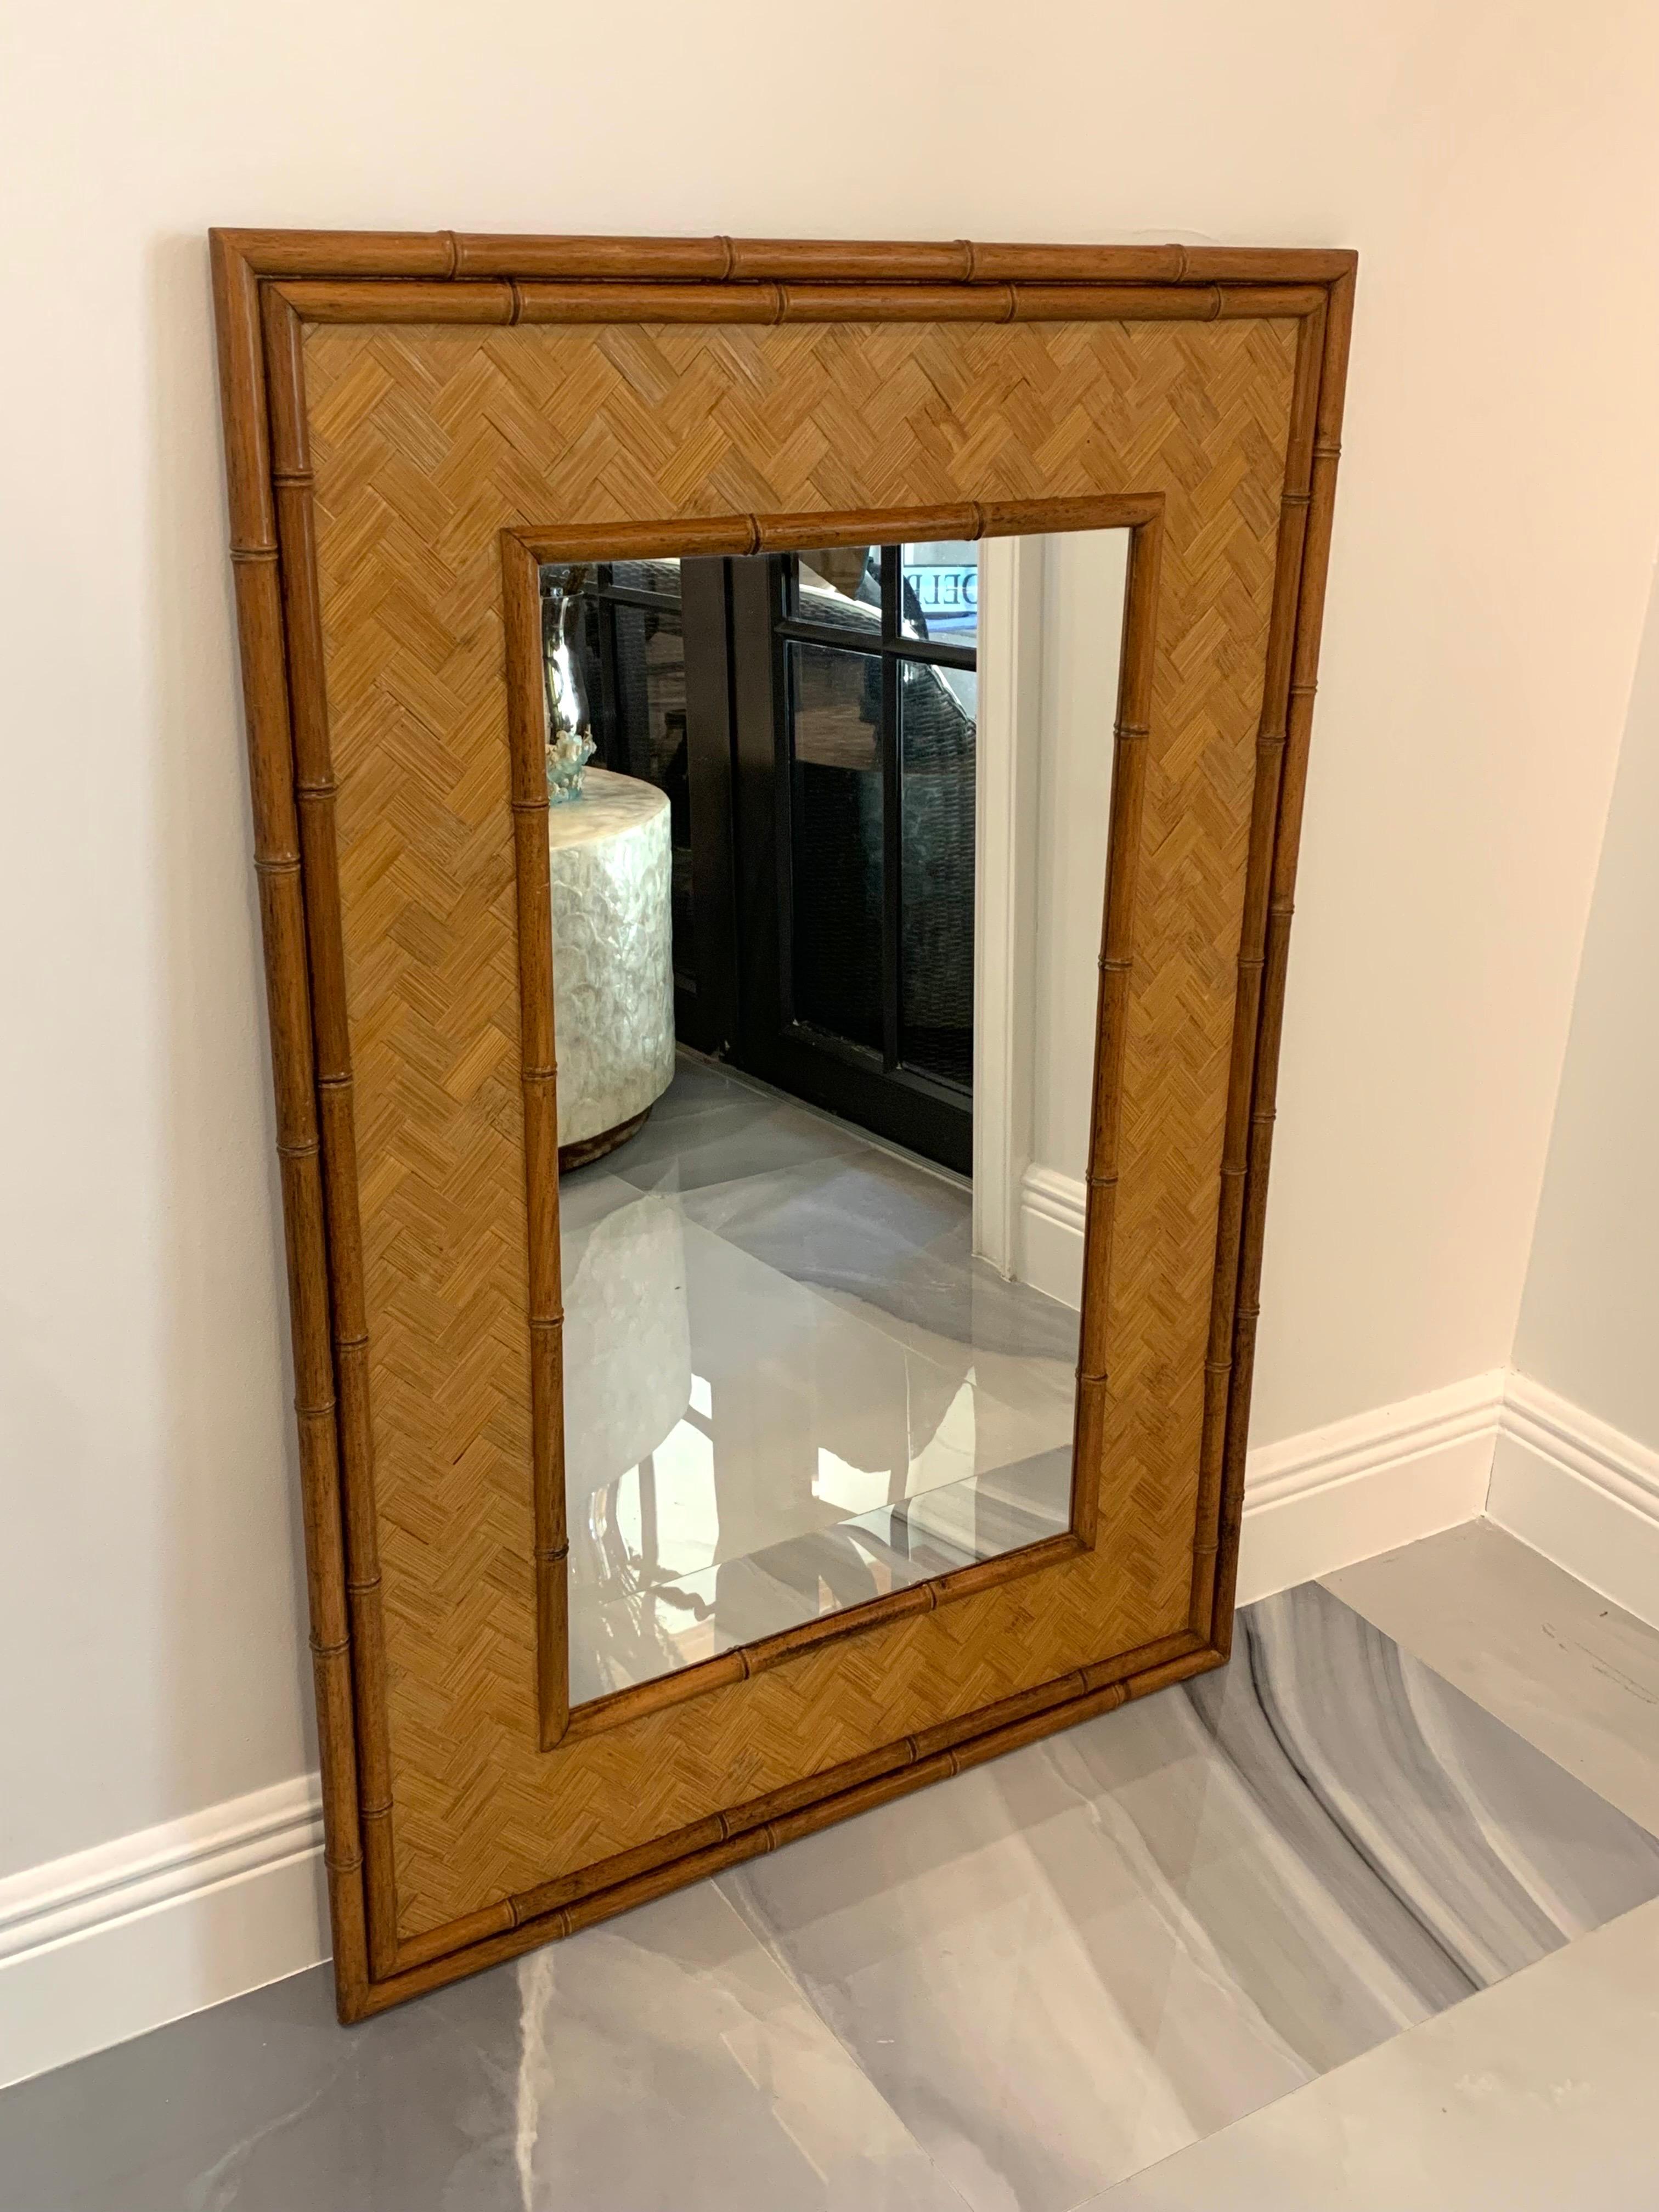 Regency mirror comprised of two wooden borders carved to mimic bamboo framing a rattan lattice pattern and the mirror. Well constructed and in good condition for its age. Has some beautiful light patina throughout and the mirror is in great shape.